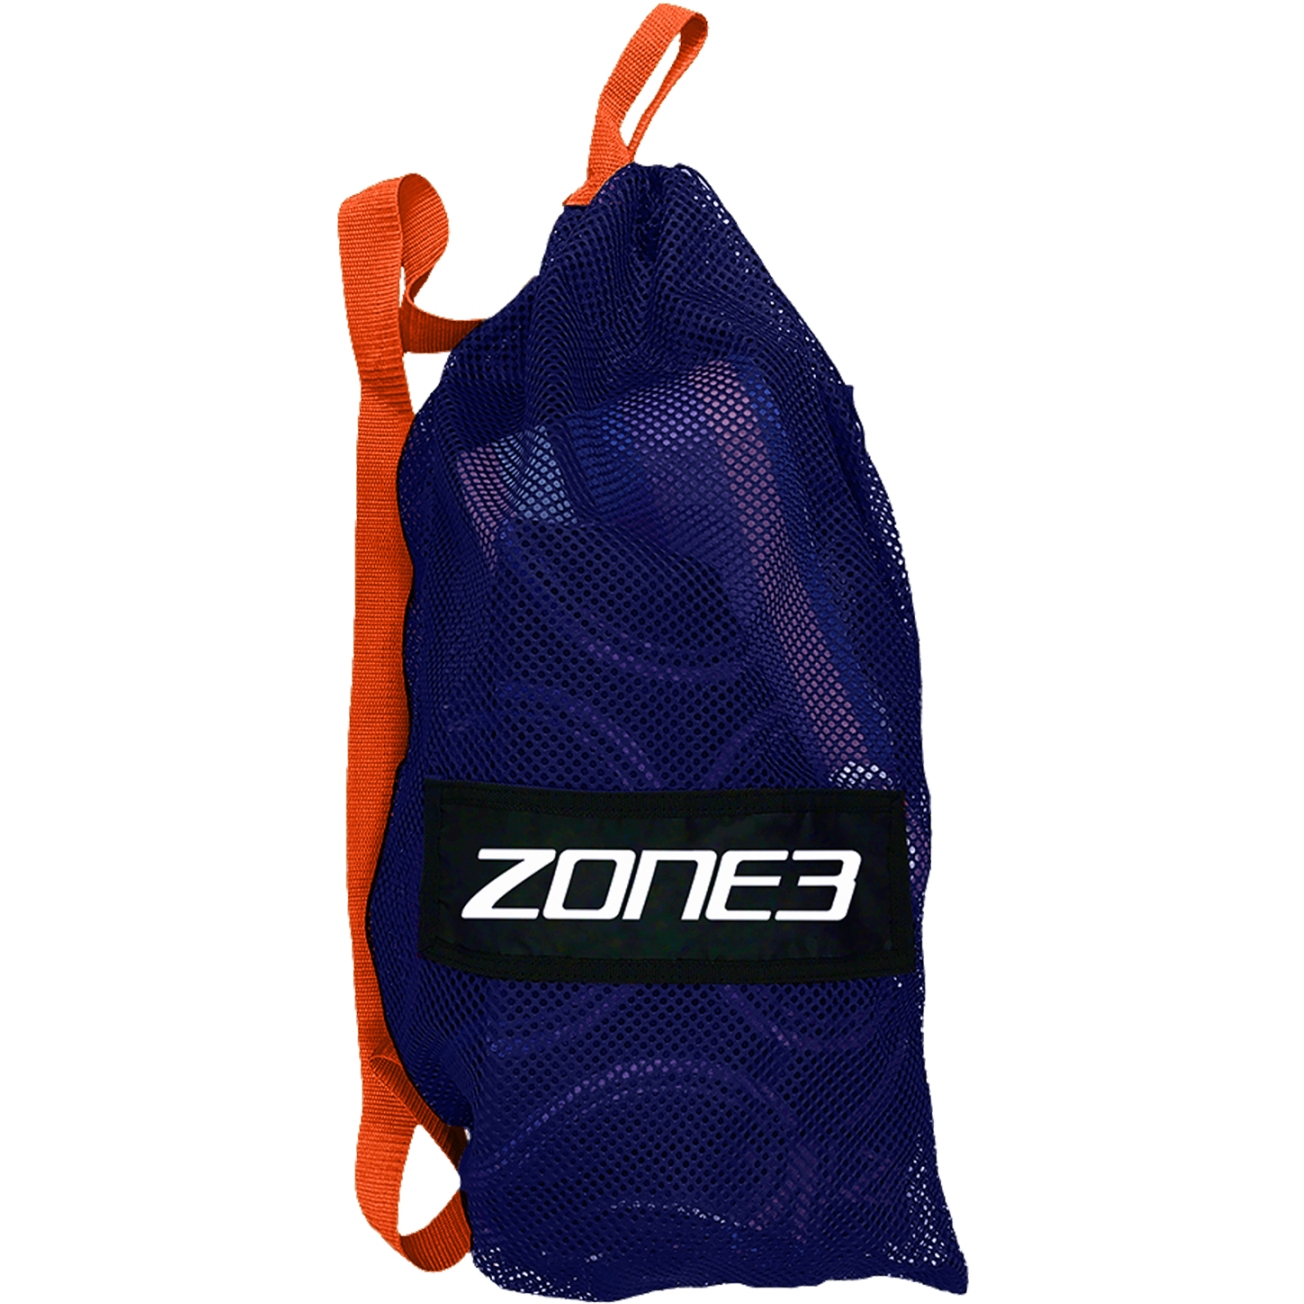 Picture of Zone3 Small Mesh Training Bag - blue/orange